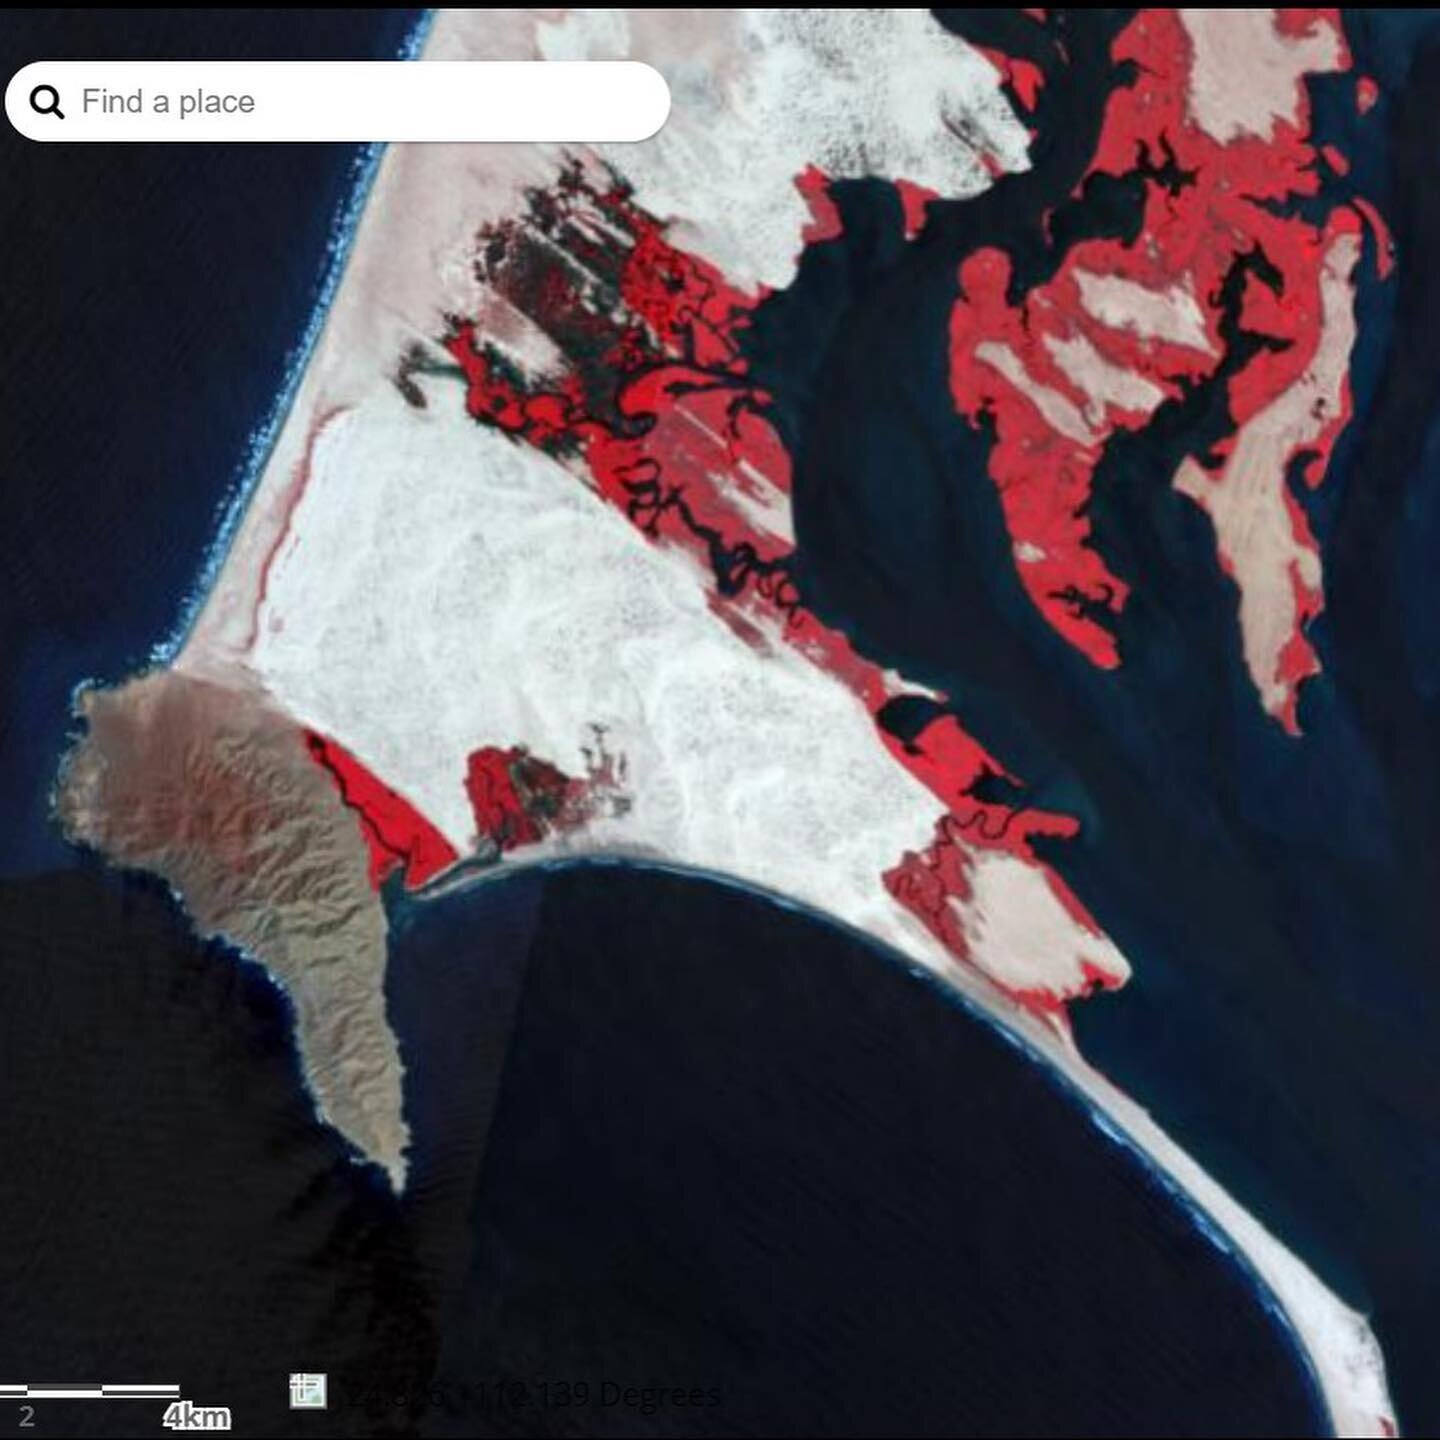 I thought I&rsquo;d share with you guys some work I&rsquo;ve been doing examining the mangroves of Baja California Sur using Landsat imagery. Landsat is one of the longest running imagery programs out there. It&rsquo;s high quality data covers many w